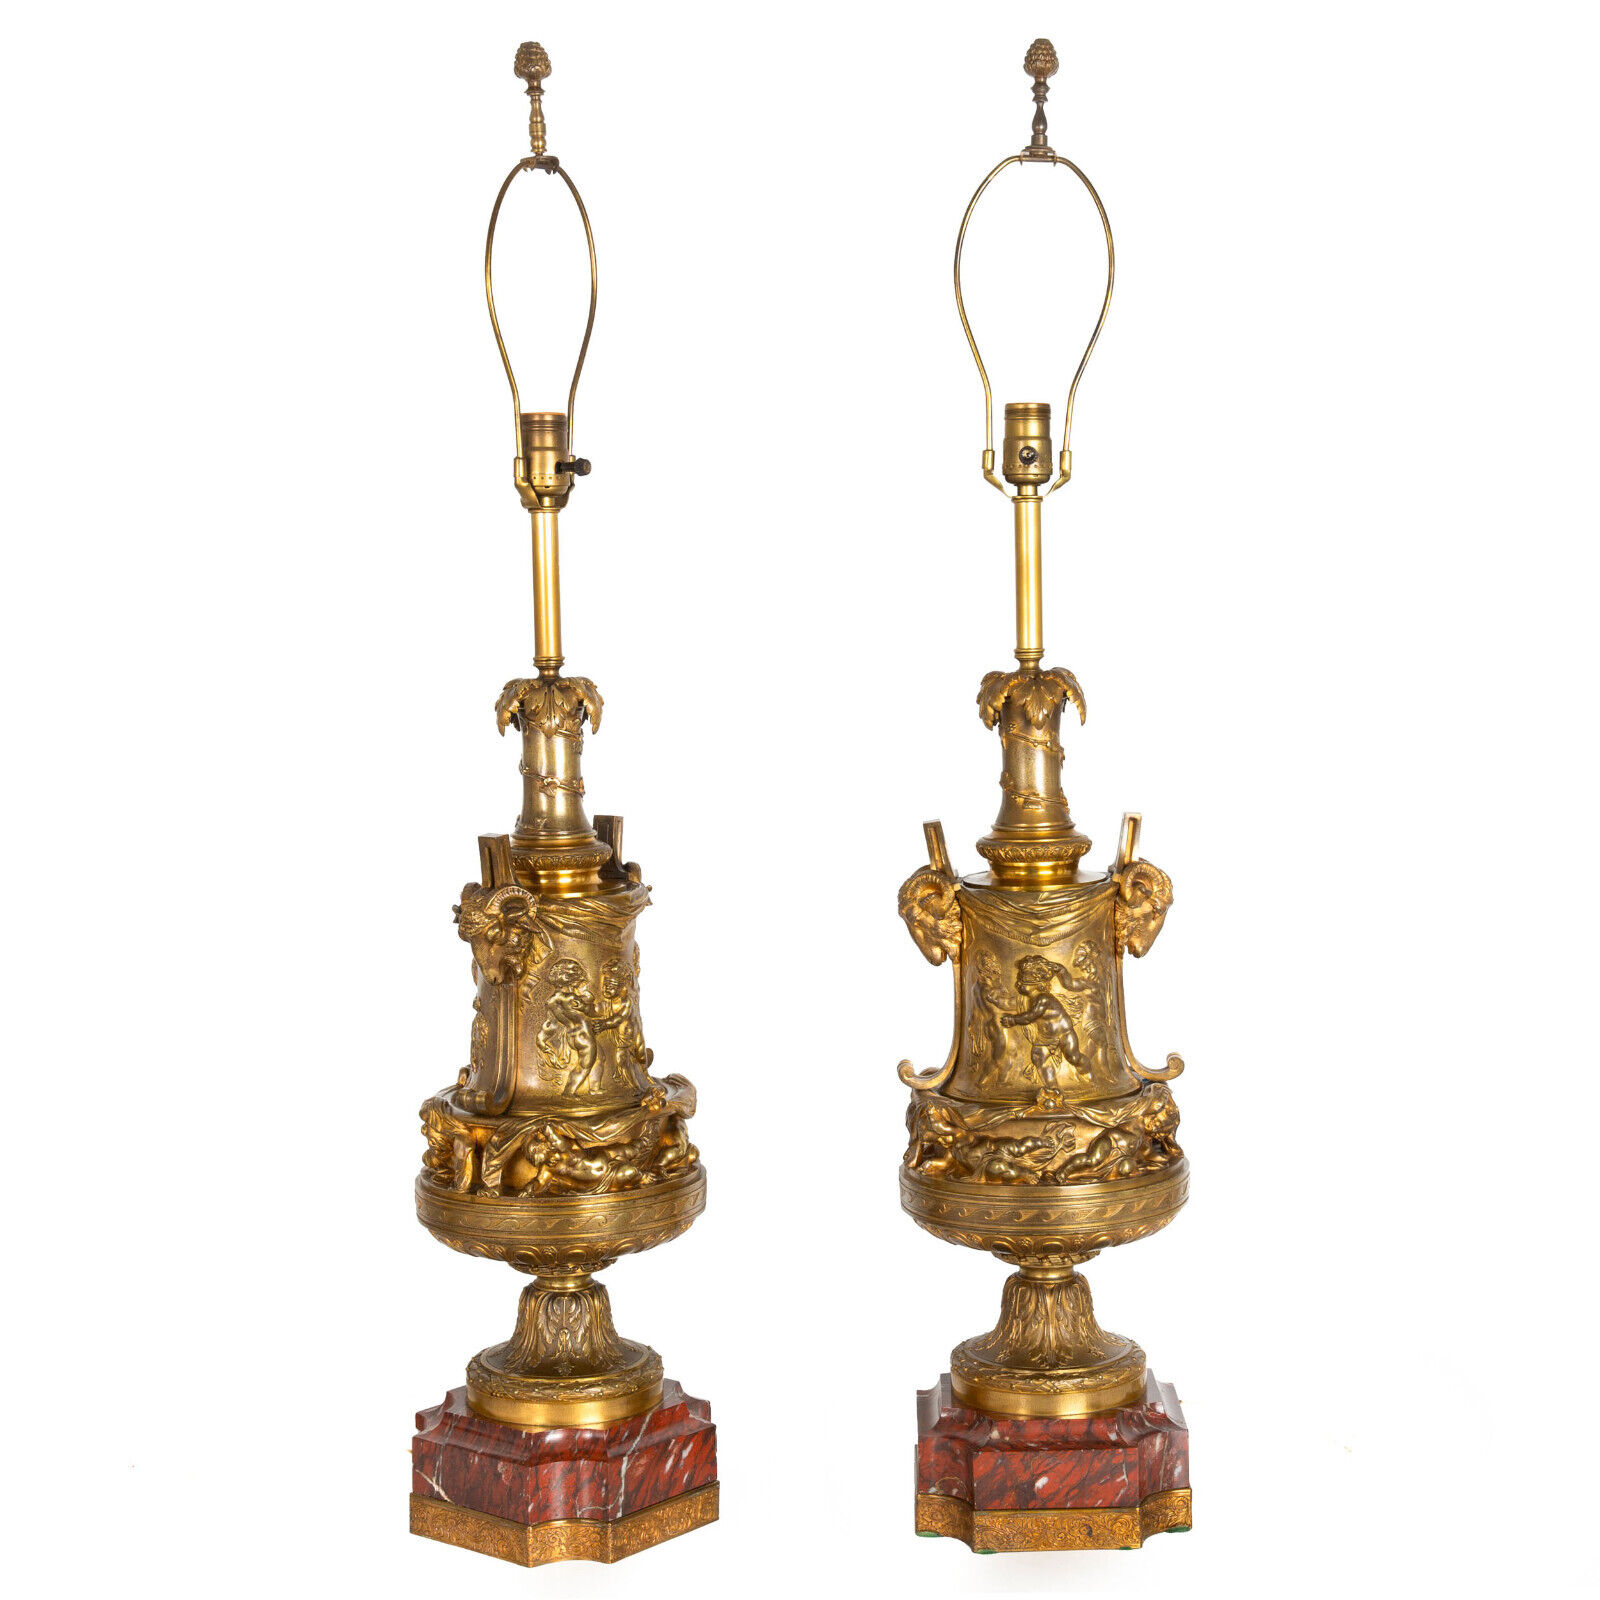 Fine Pair of French Antique Bronze and Red Marble Table Lamps, 19th Century